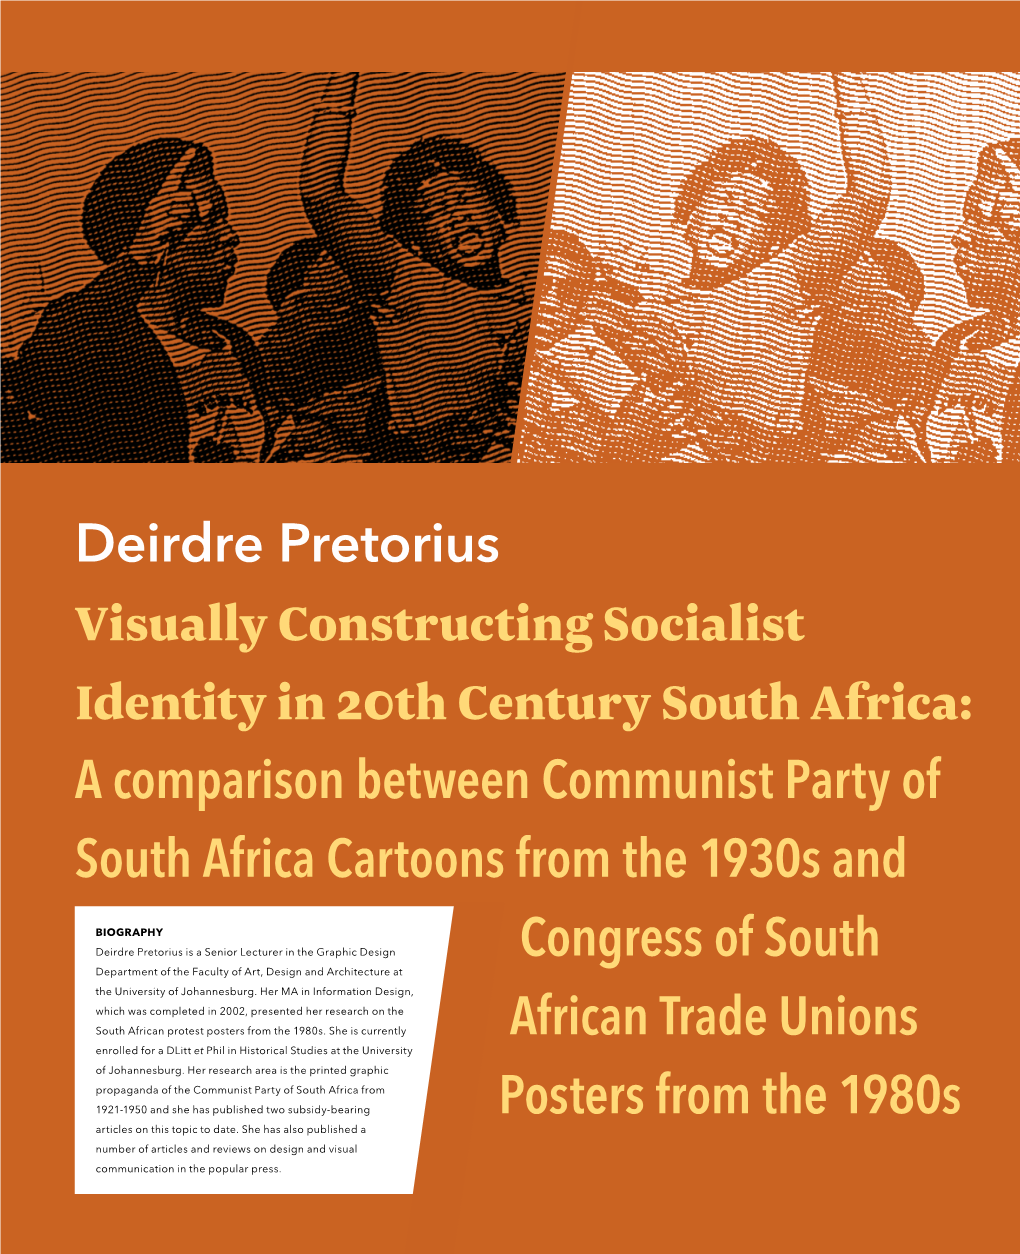 Visually Constructing Socialist Identity in 20Th Century South Africa: a Comparison Between Communist Party of South Africa Cartoons from the 1930S And